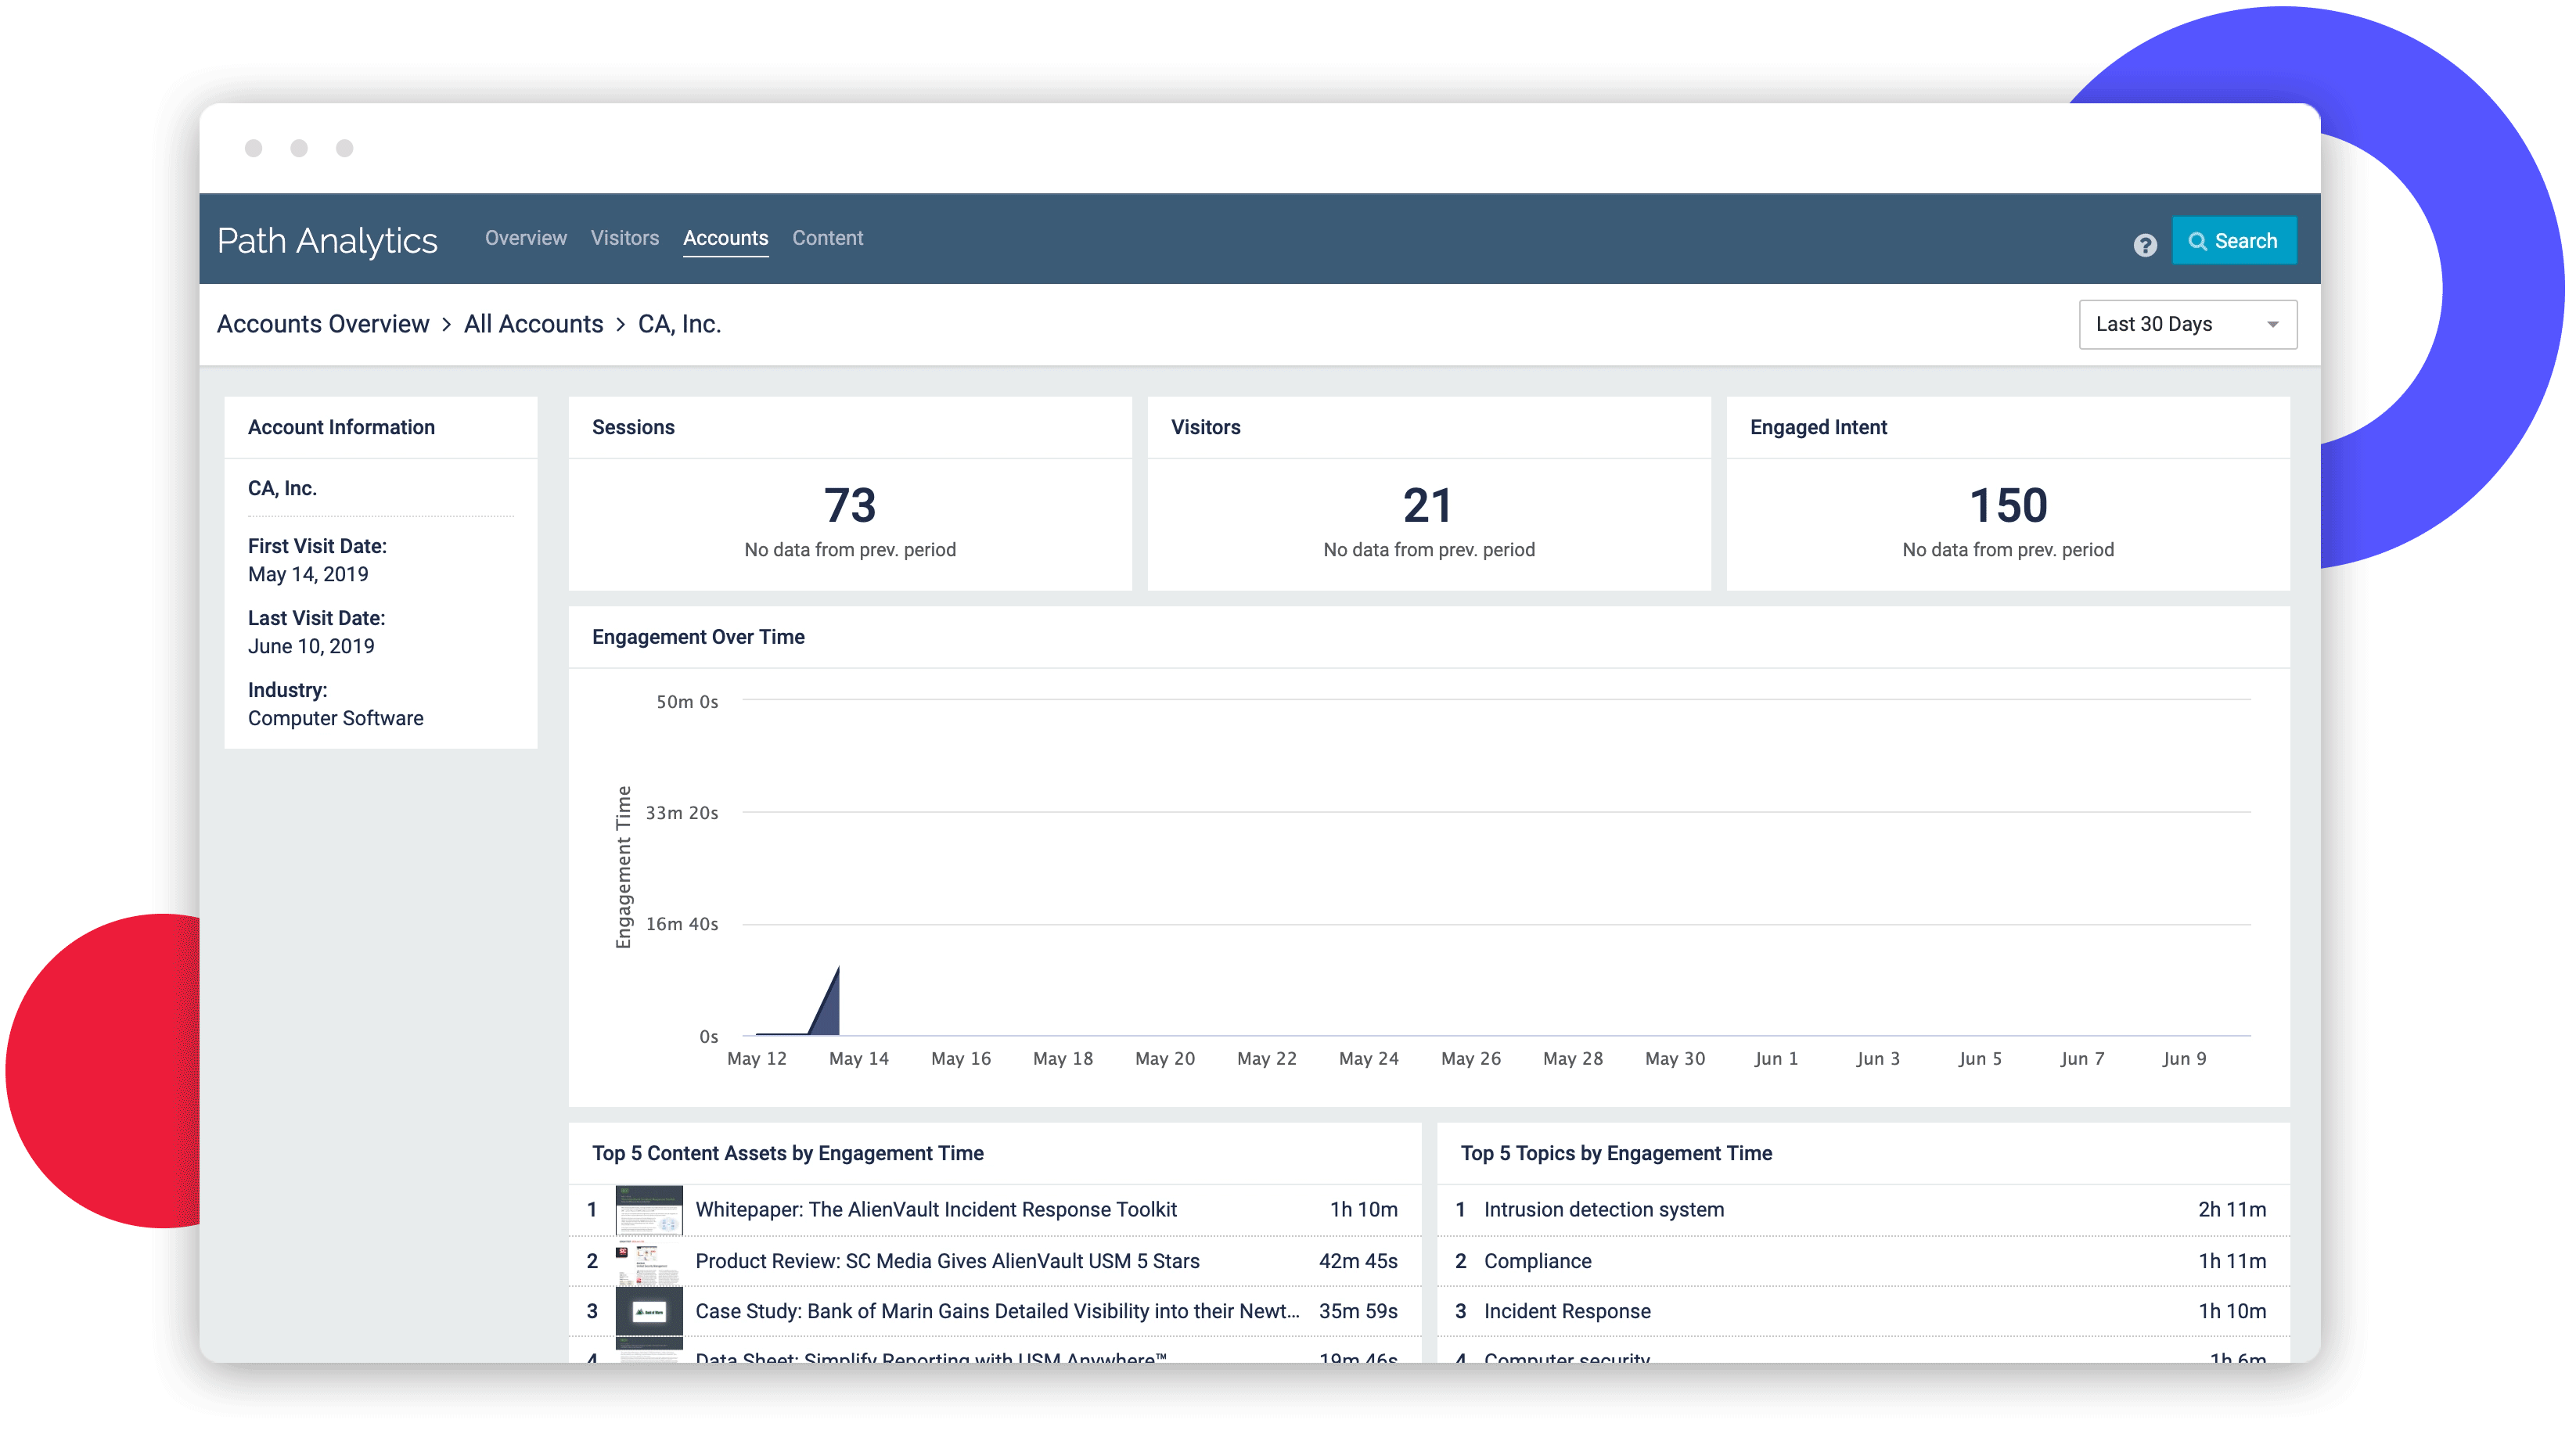 A screenshot of an analytical window from the backend of PathFactory. This table shows the content performance for a specific account - it shows how many sessions the account has had over time and which content assets and topics are popular at that account.